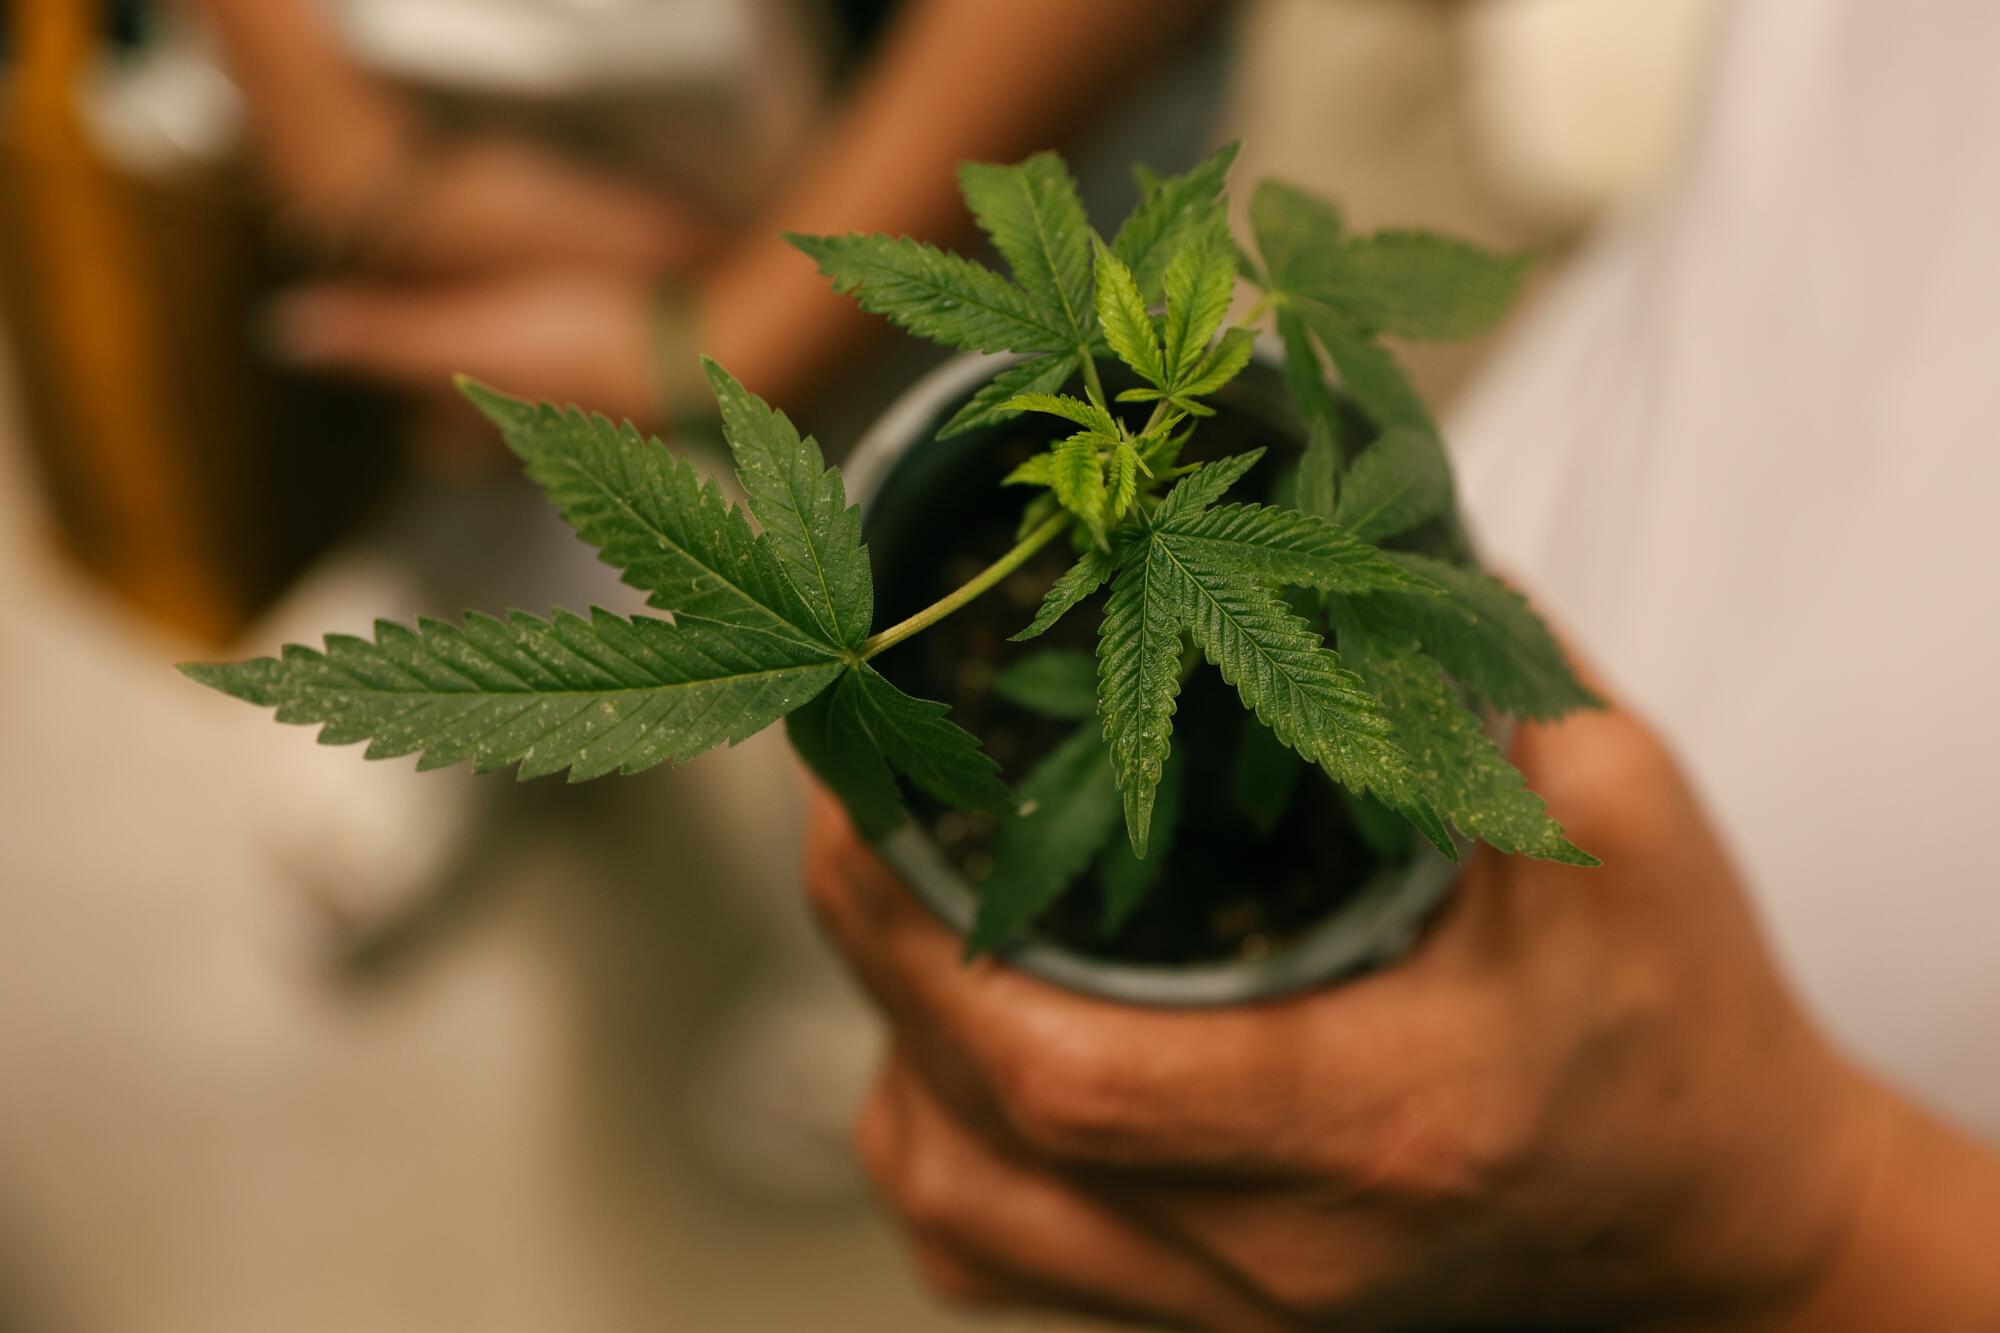 A hand holds a small potted cannabis plant.